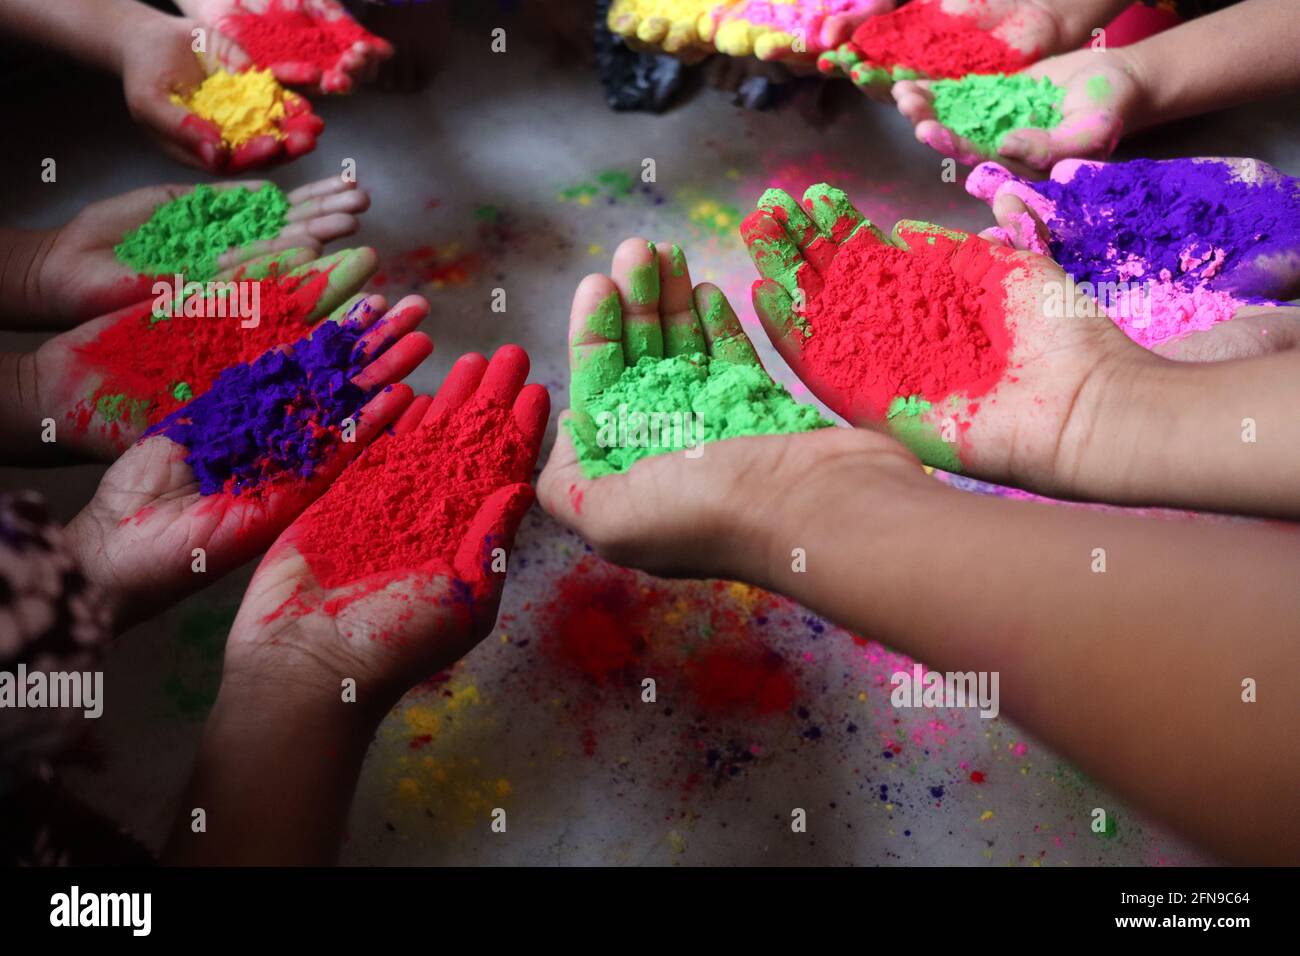 multiple colored powder on hands for holiday Stock Photo